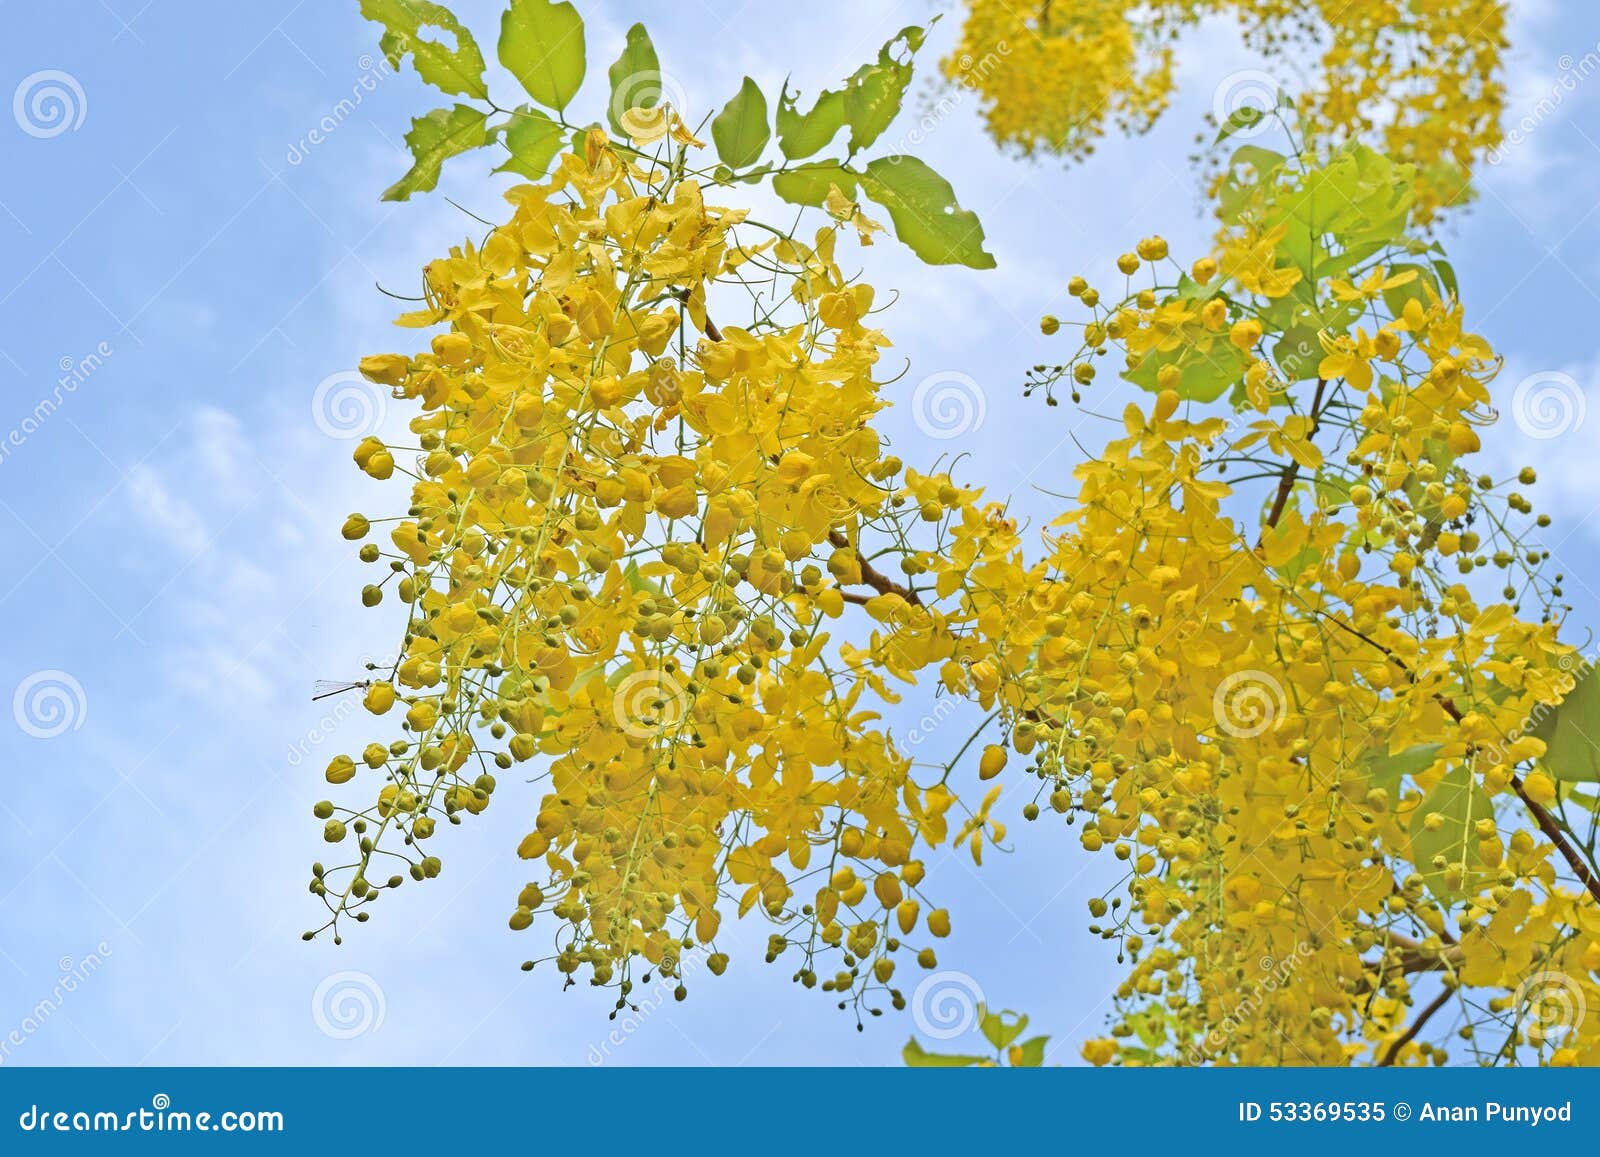 Golden Shower Flowers Stock Photos and Pictures - 26,613 Images |  Shutterstock